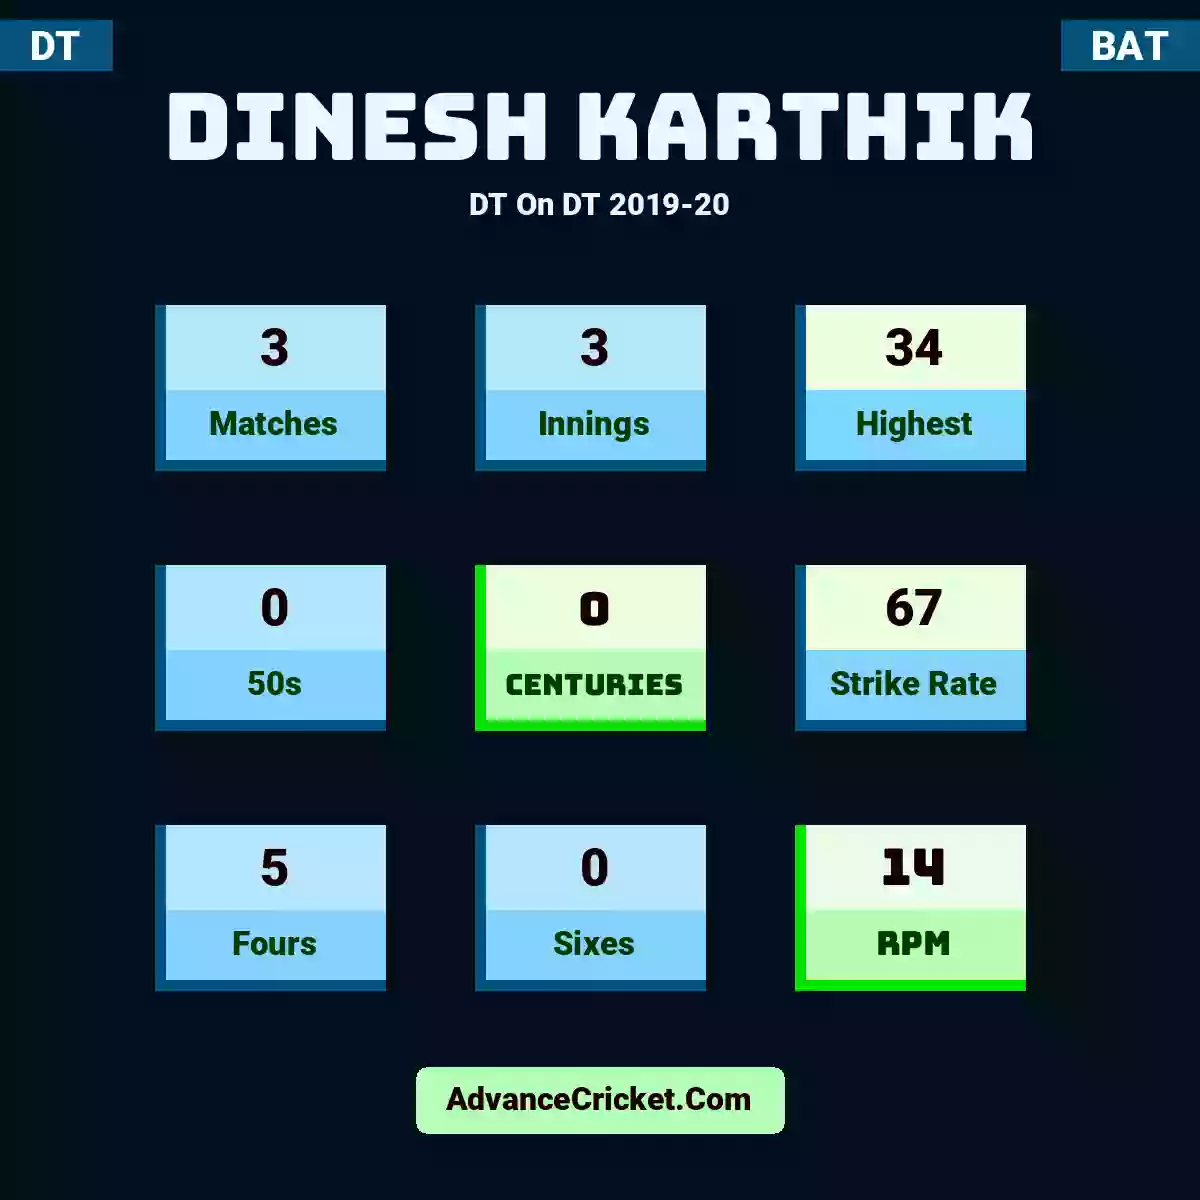 Dinesh Karthik DT  On DT 2019-20, Dinesh Karthik played 3 matches, scored 34 runs as highest, 0 half-centuries, and 0 centuries, with a strike rate of 67. D.Karthik hit 5 fours and 0 sixes, with an RPM of 14.